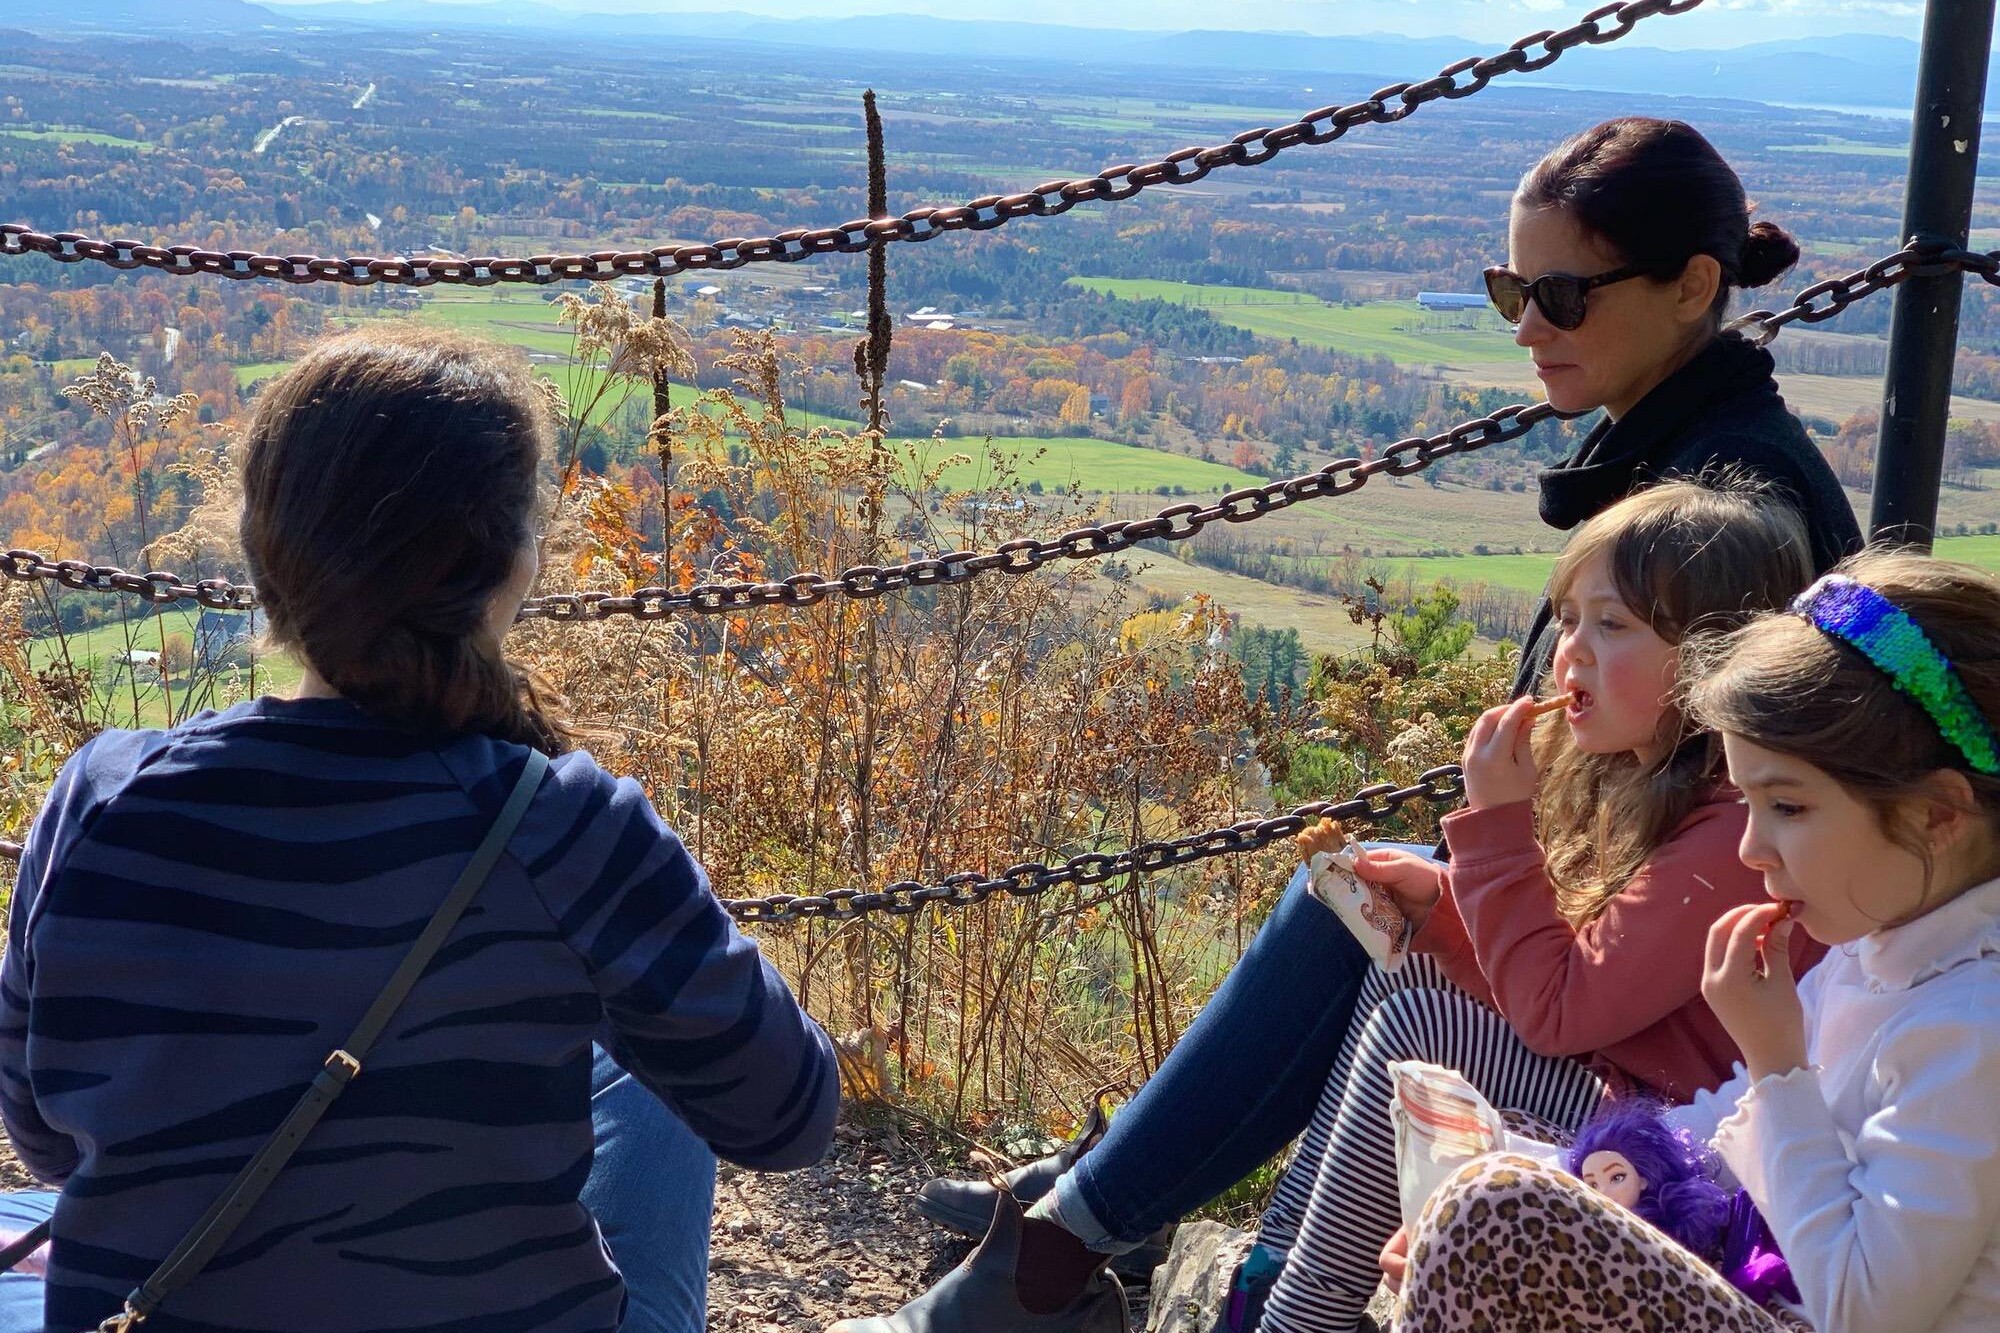 Mothers sitting with their two young girls overlooking Vermont foliage scene